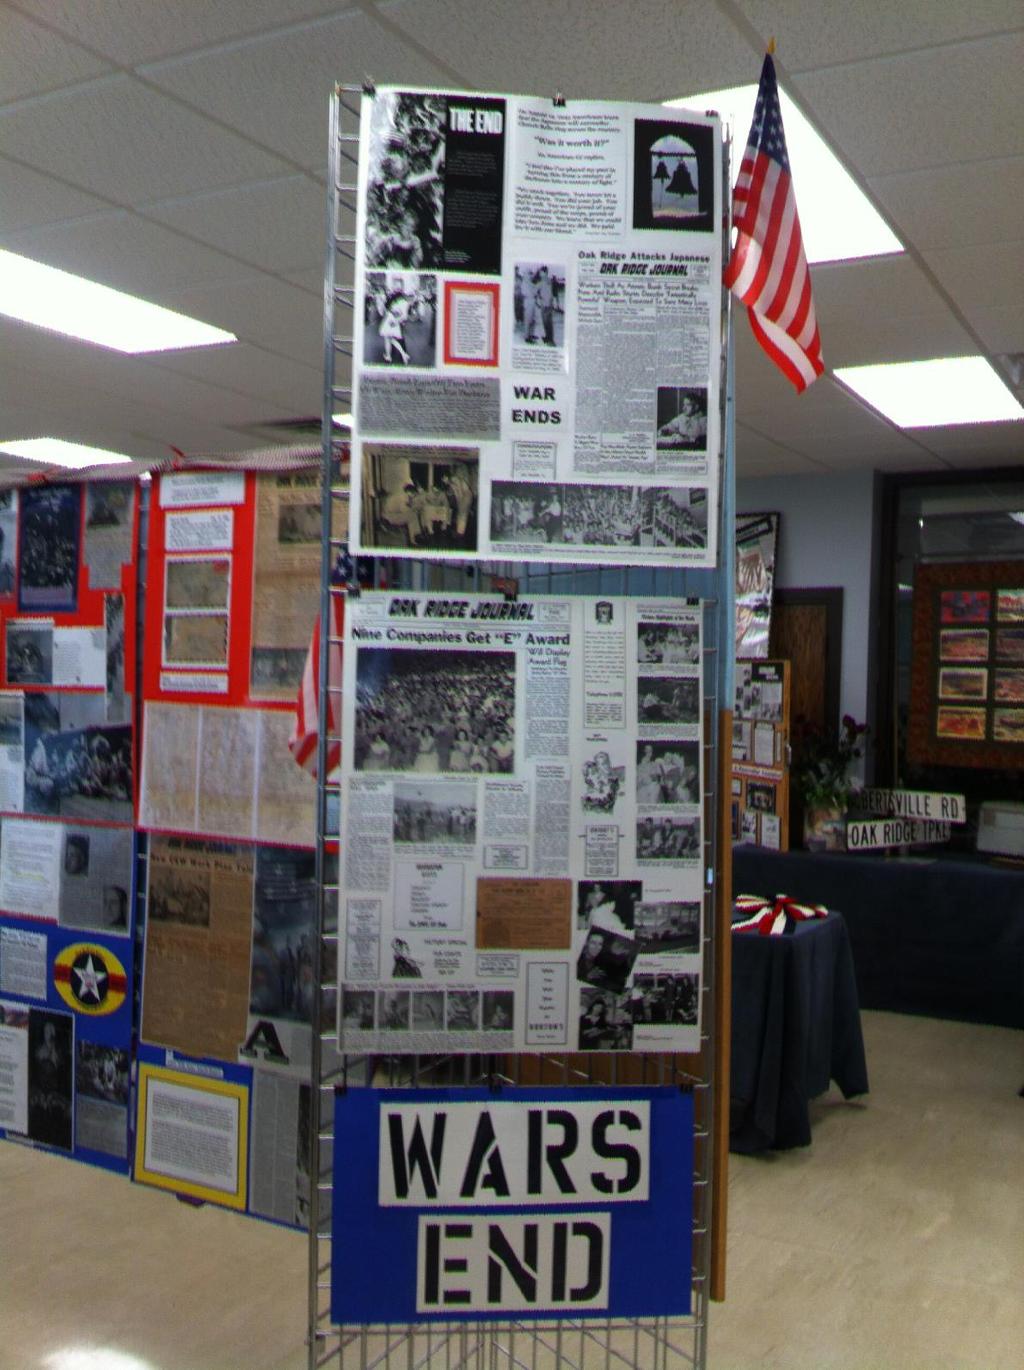 War Ends exhibit created by Ed Westcott s family featuring the iconic photographic image known